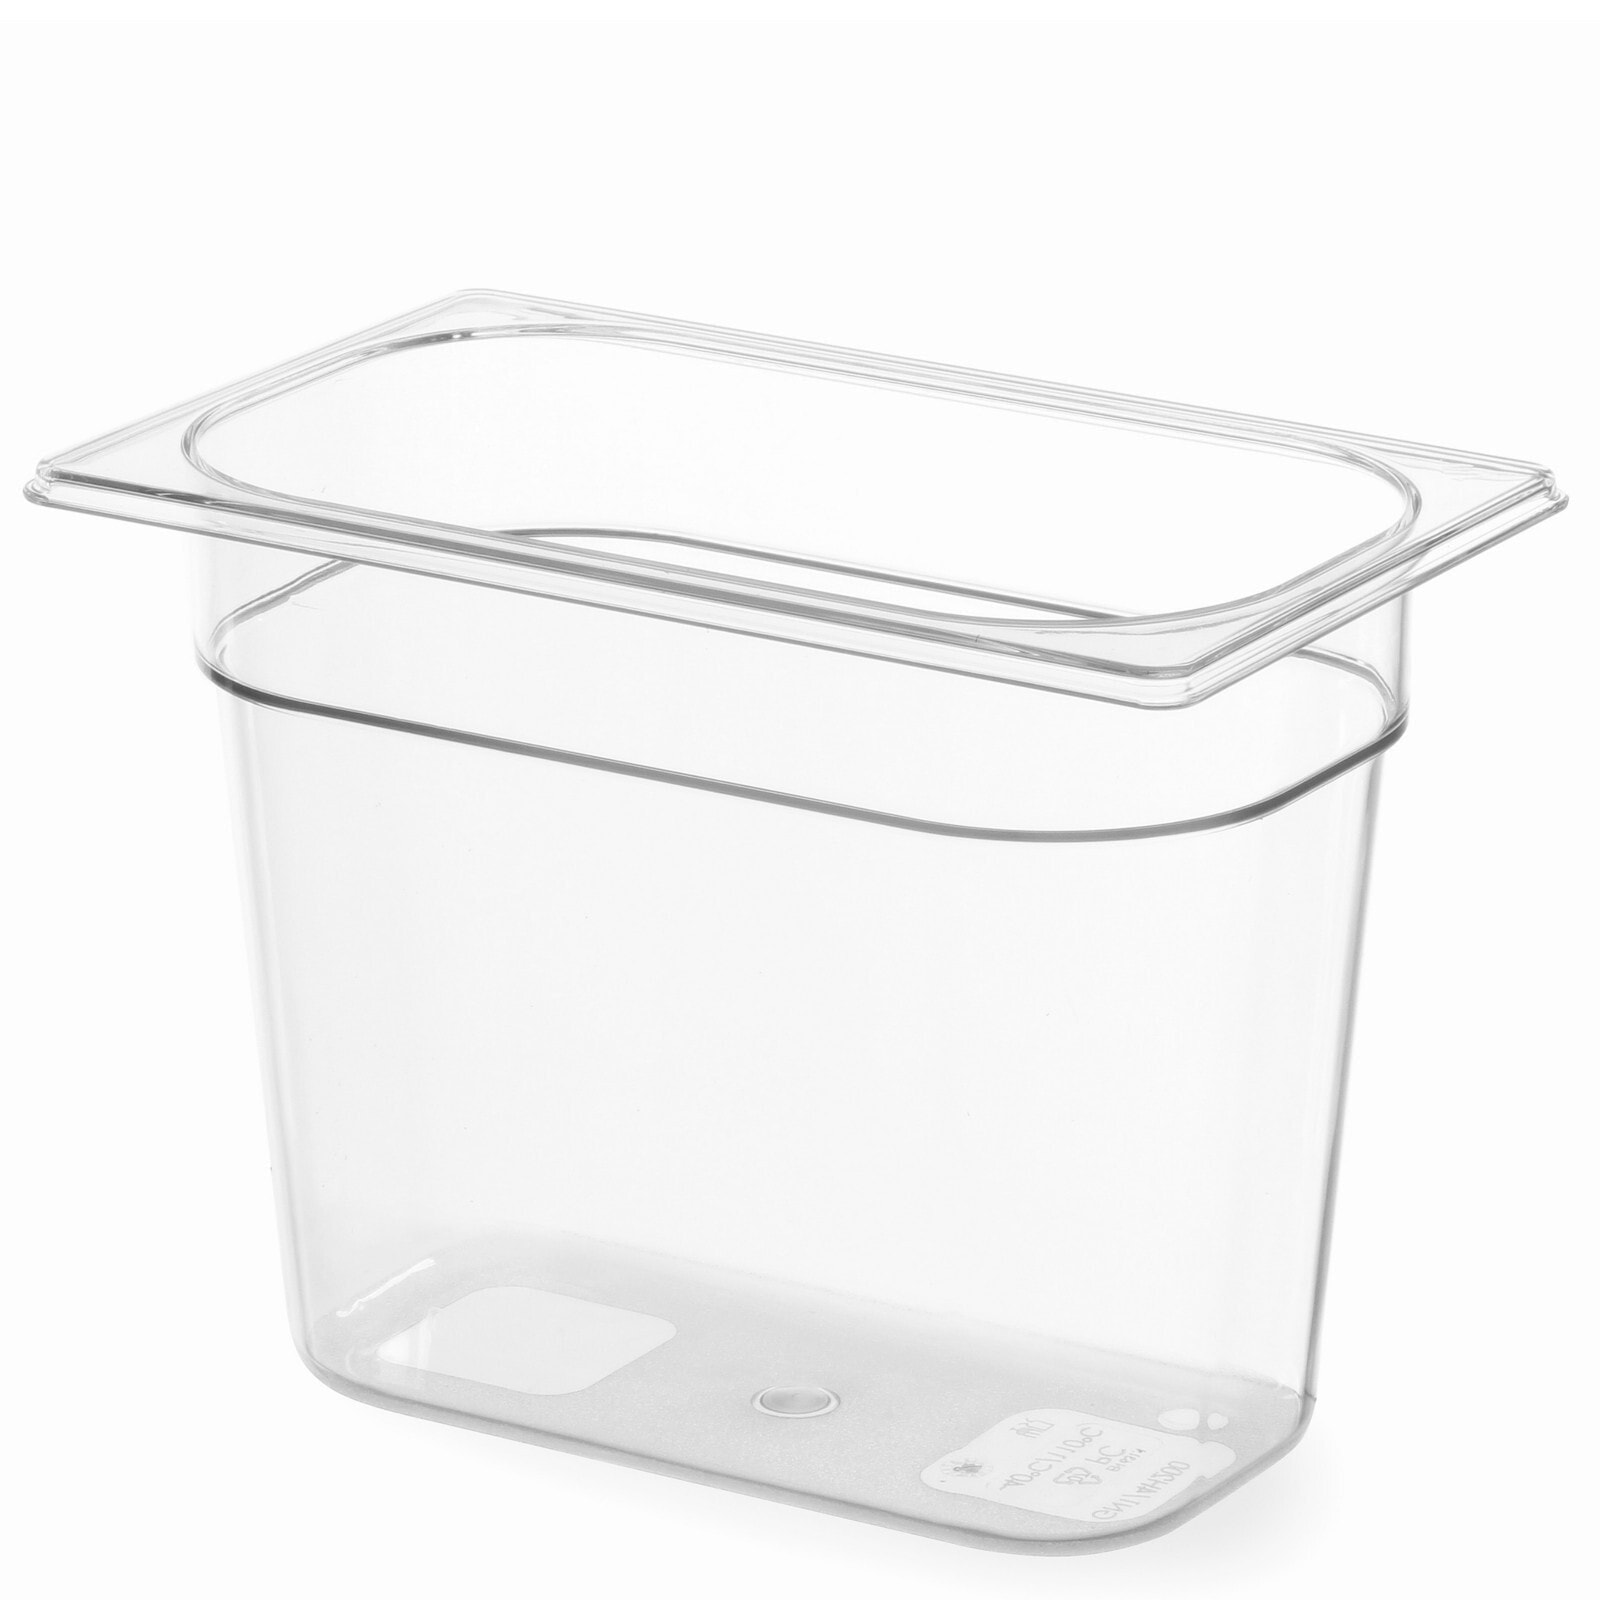 Transparent GN container made of polycarbonate 1/4 GN height 65 mm - Hendi 861639